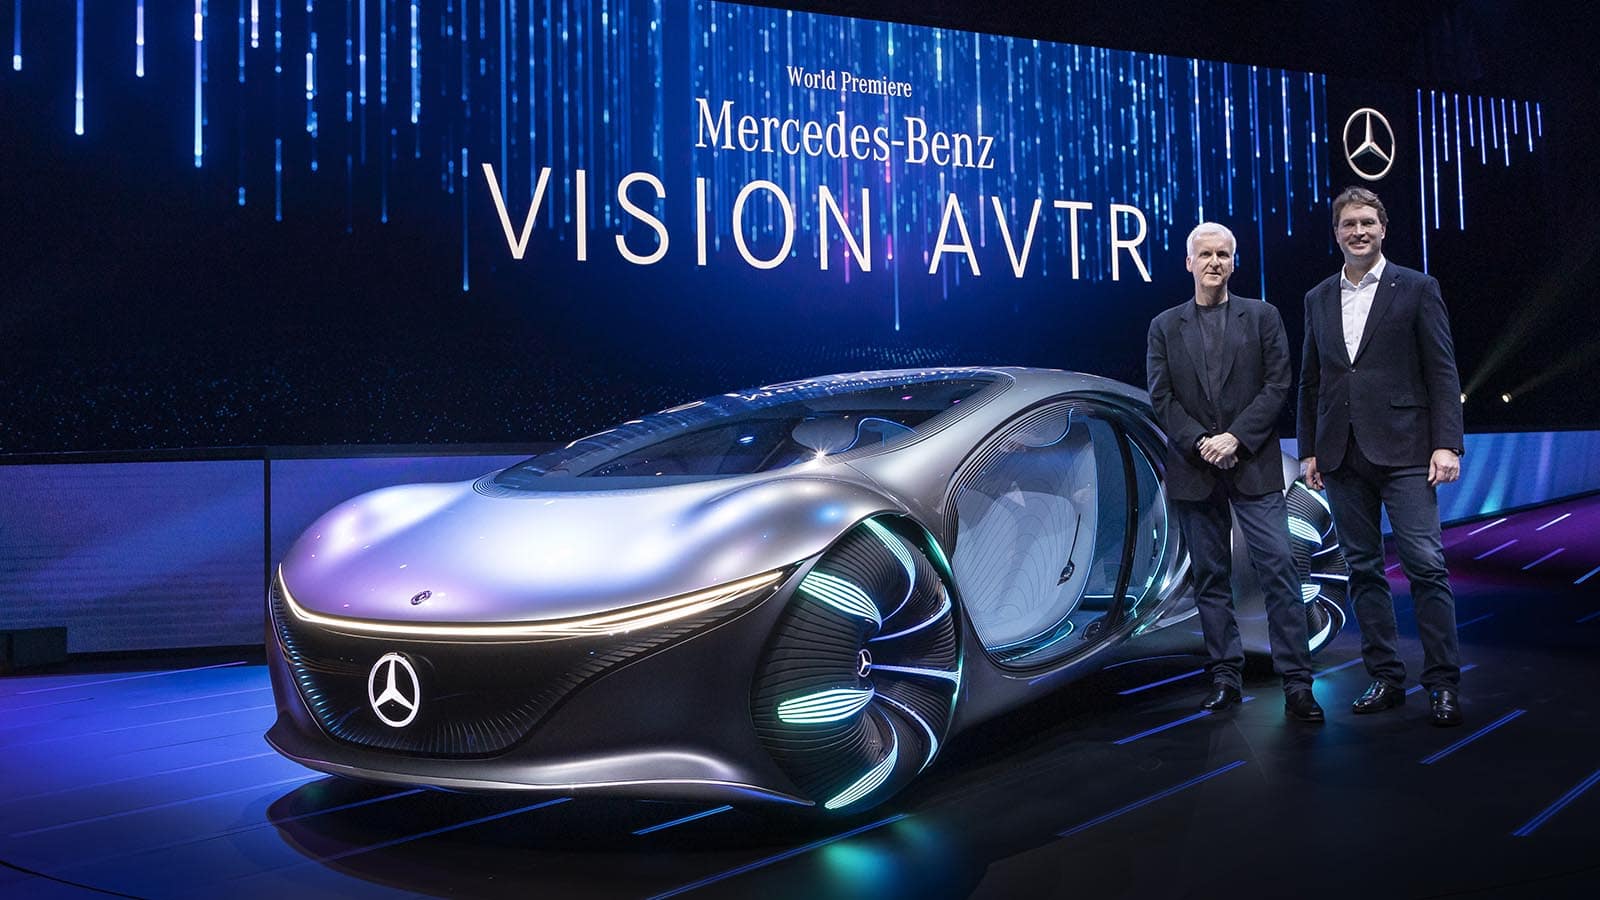 With Director James Cameron S Help Mercedes Reveals Its